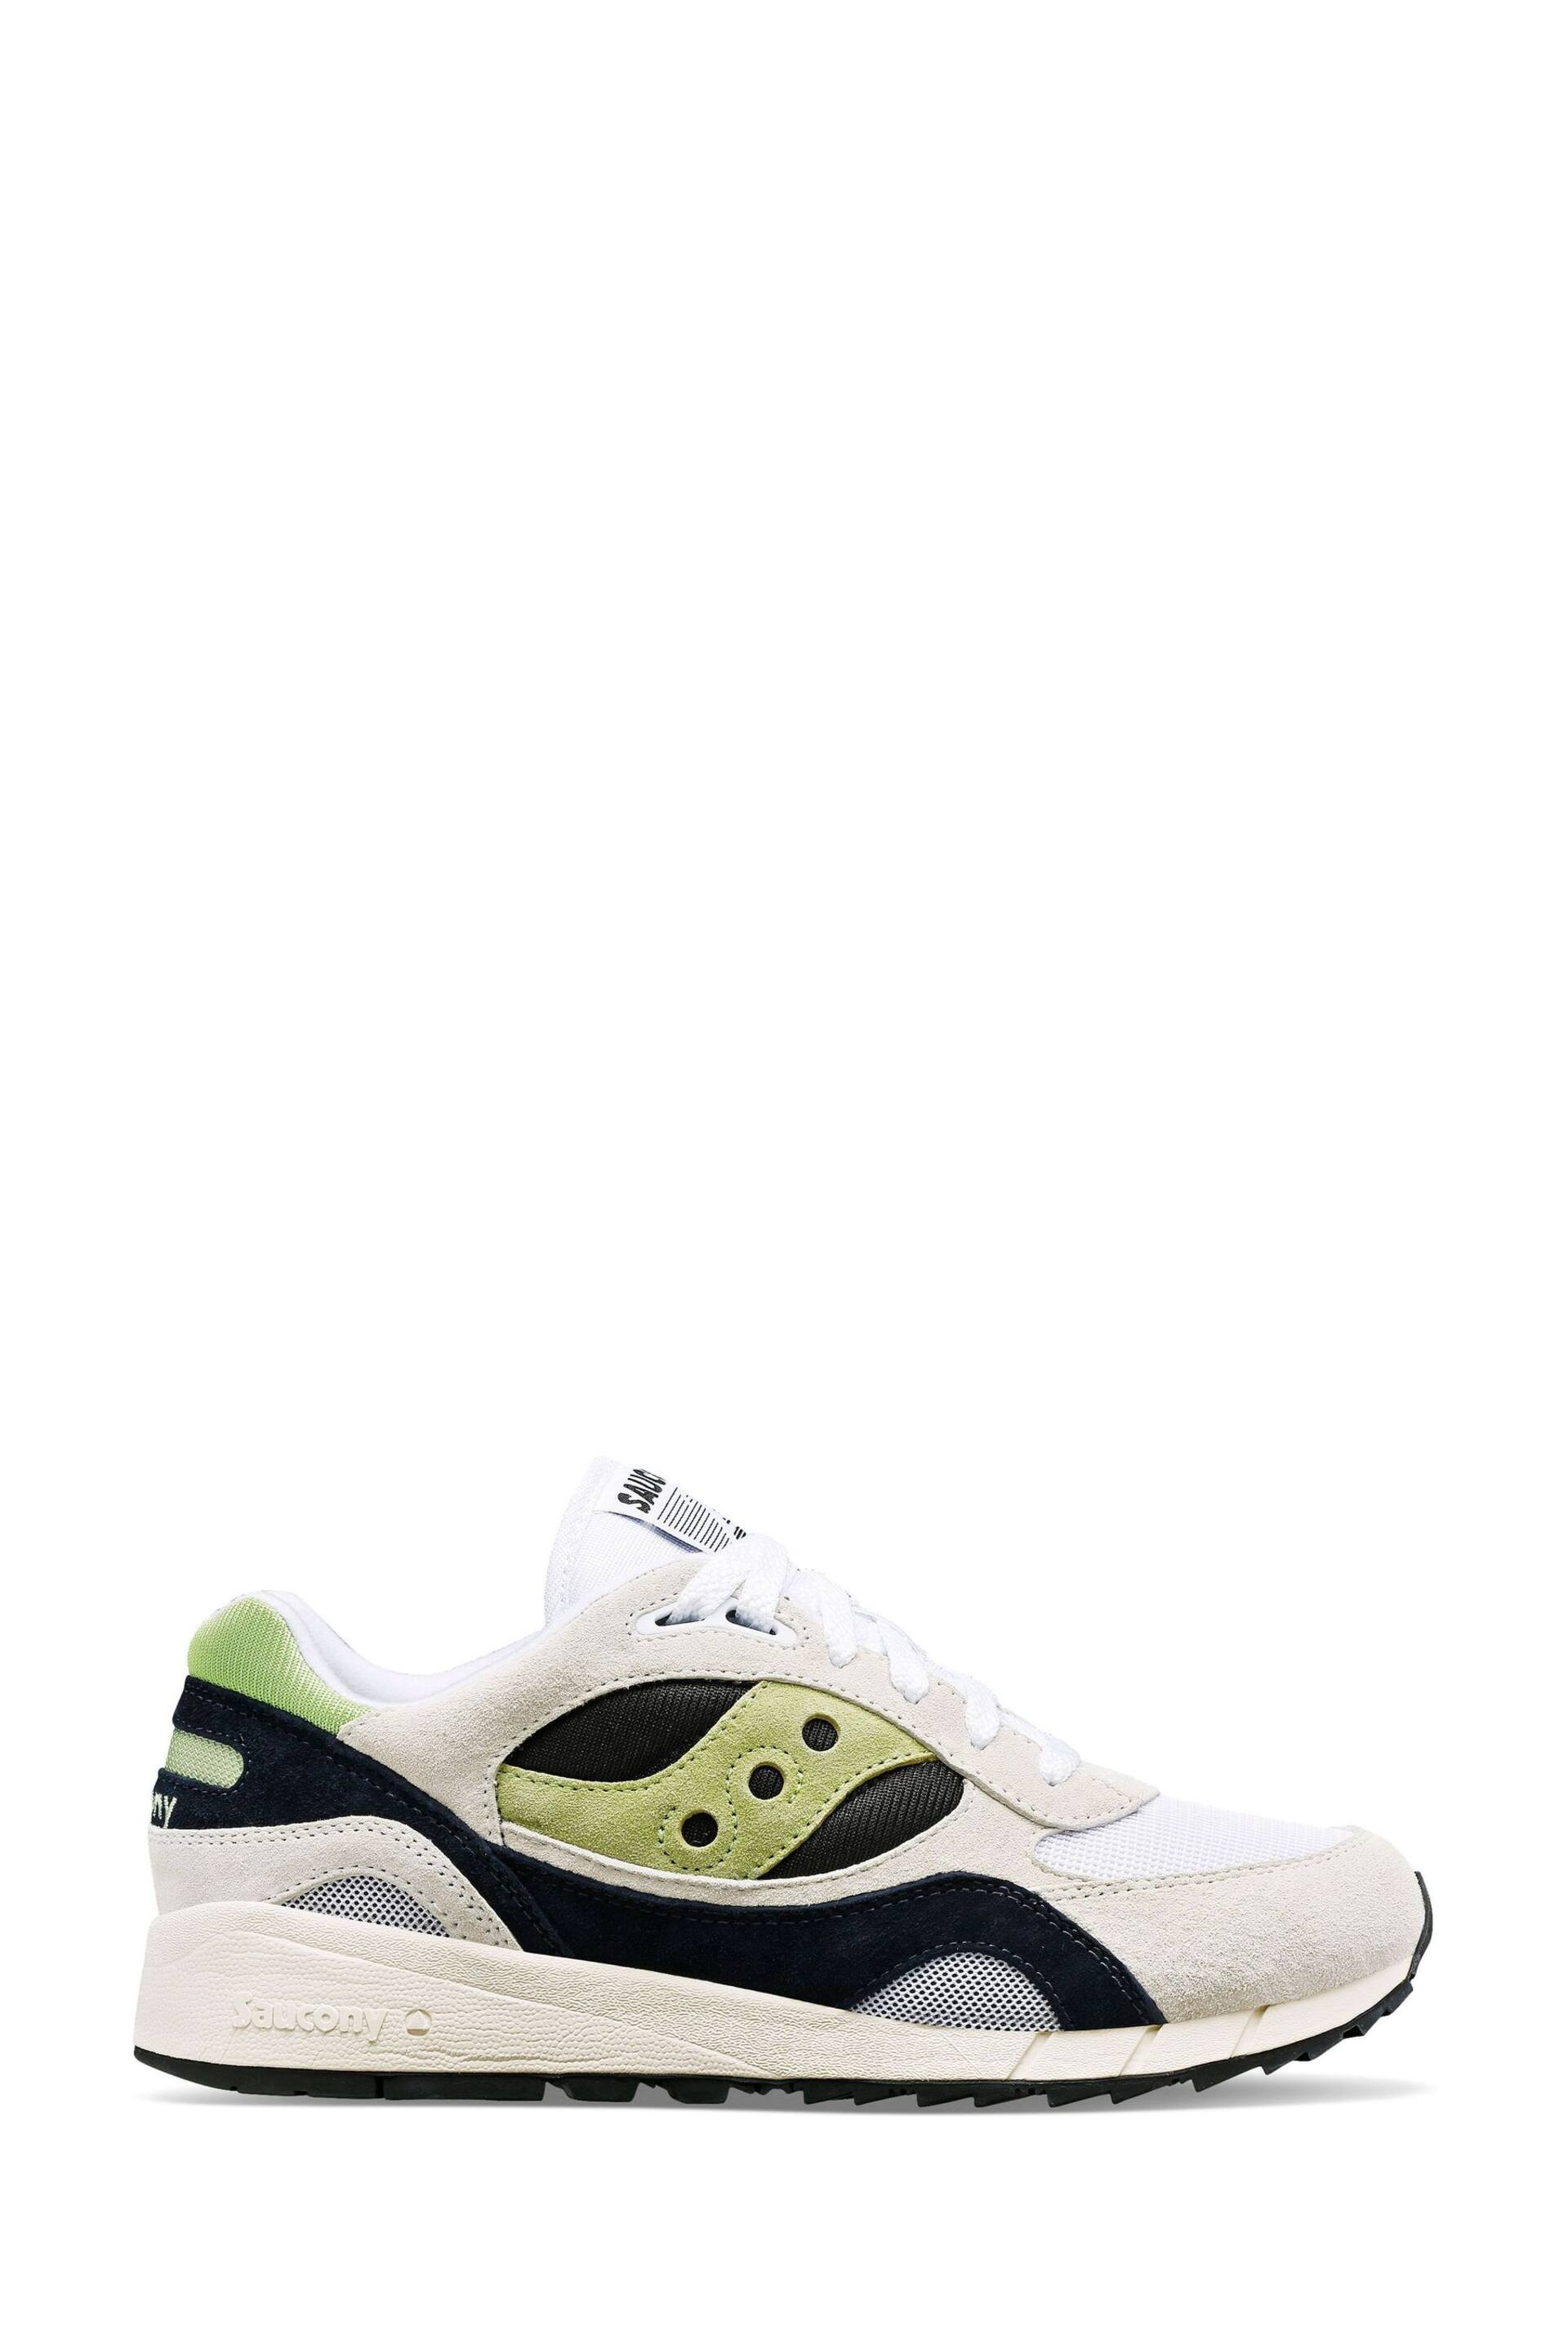 Saucony Green Shadow 6000 Trainers - Image 1 of 6